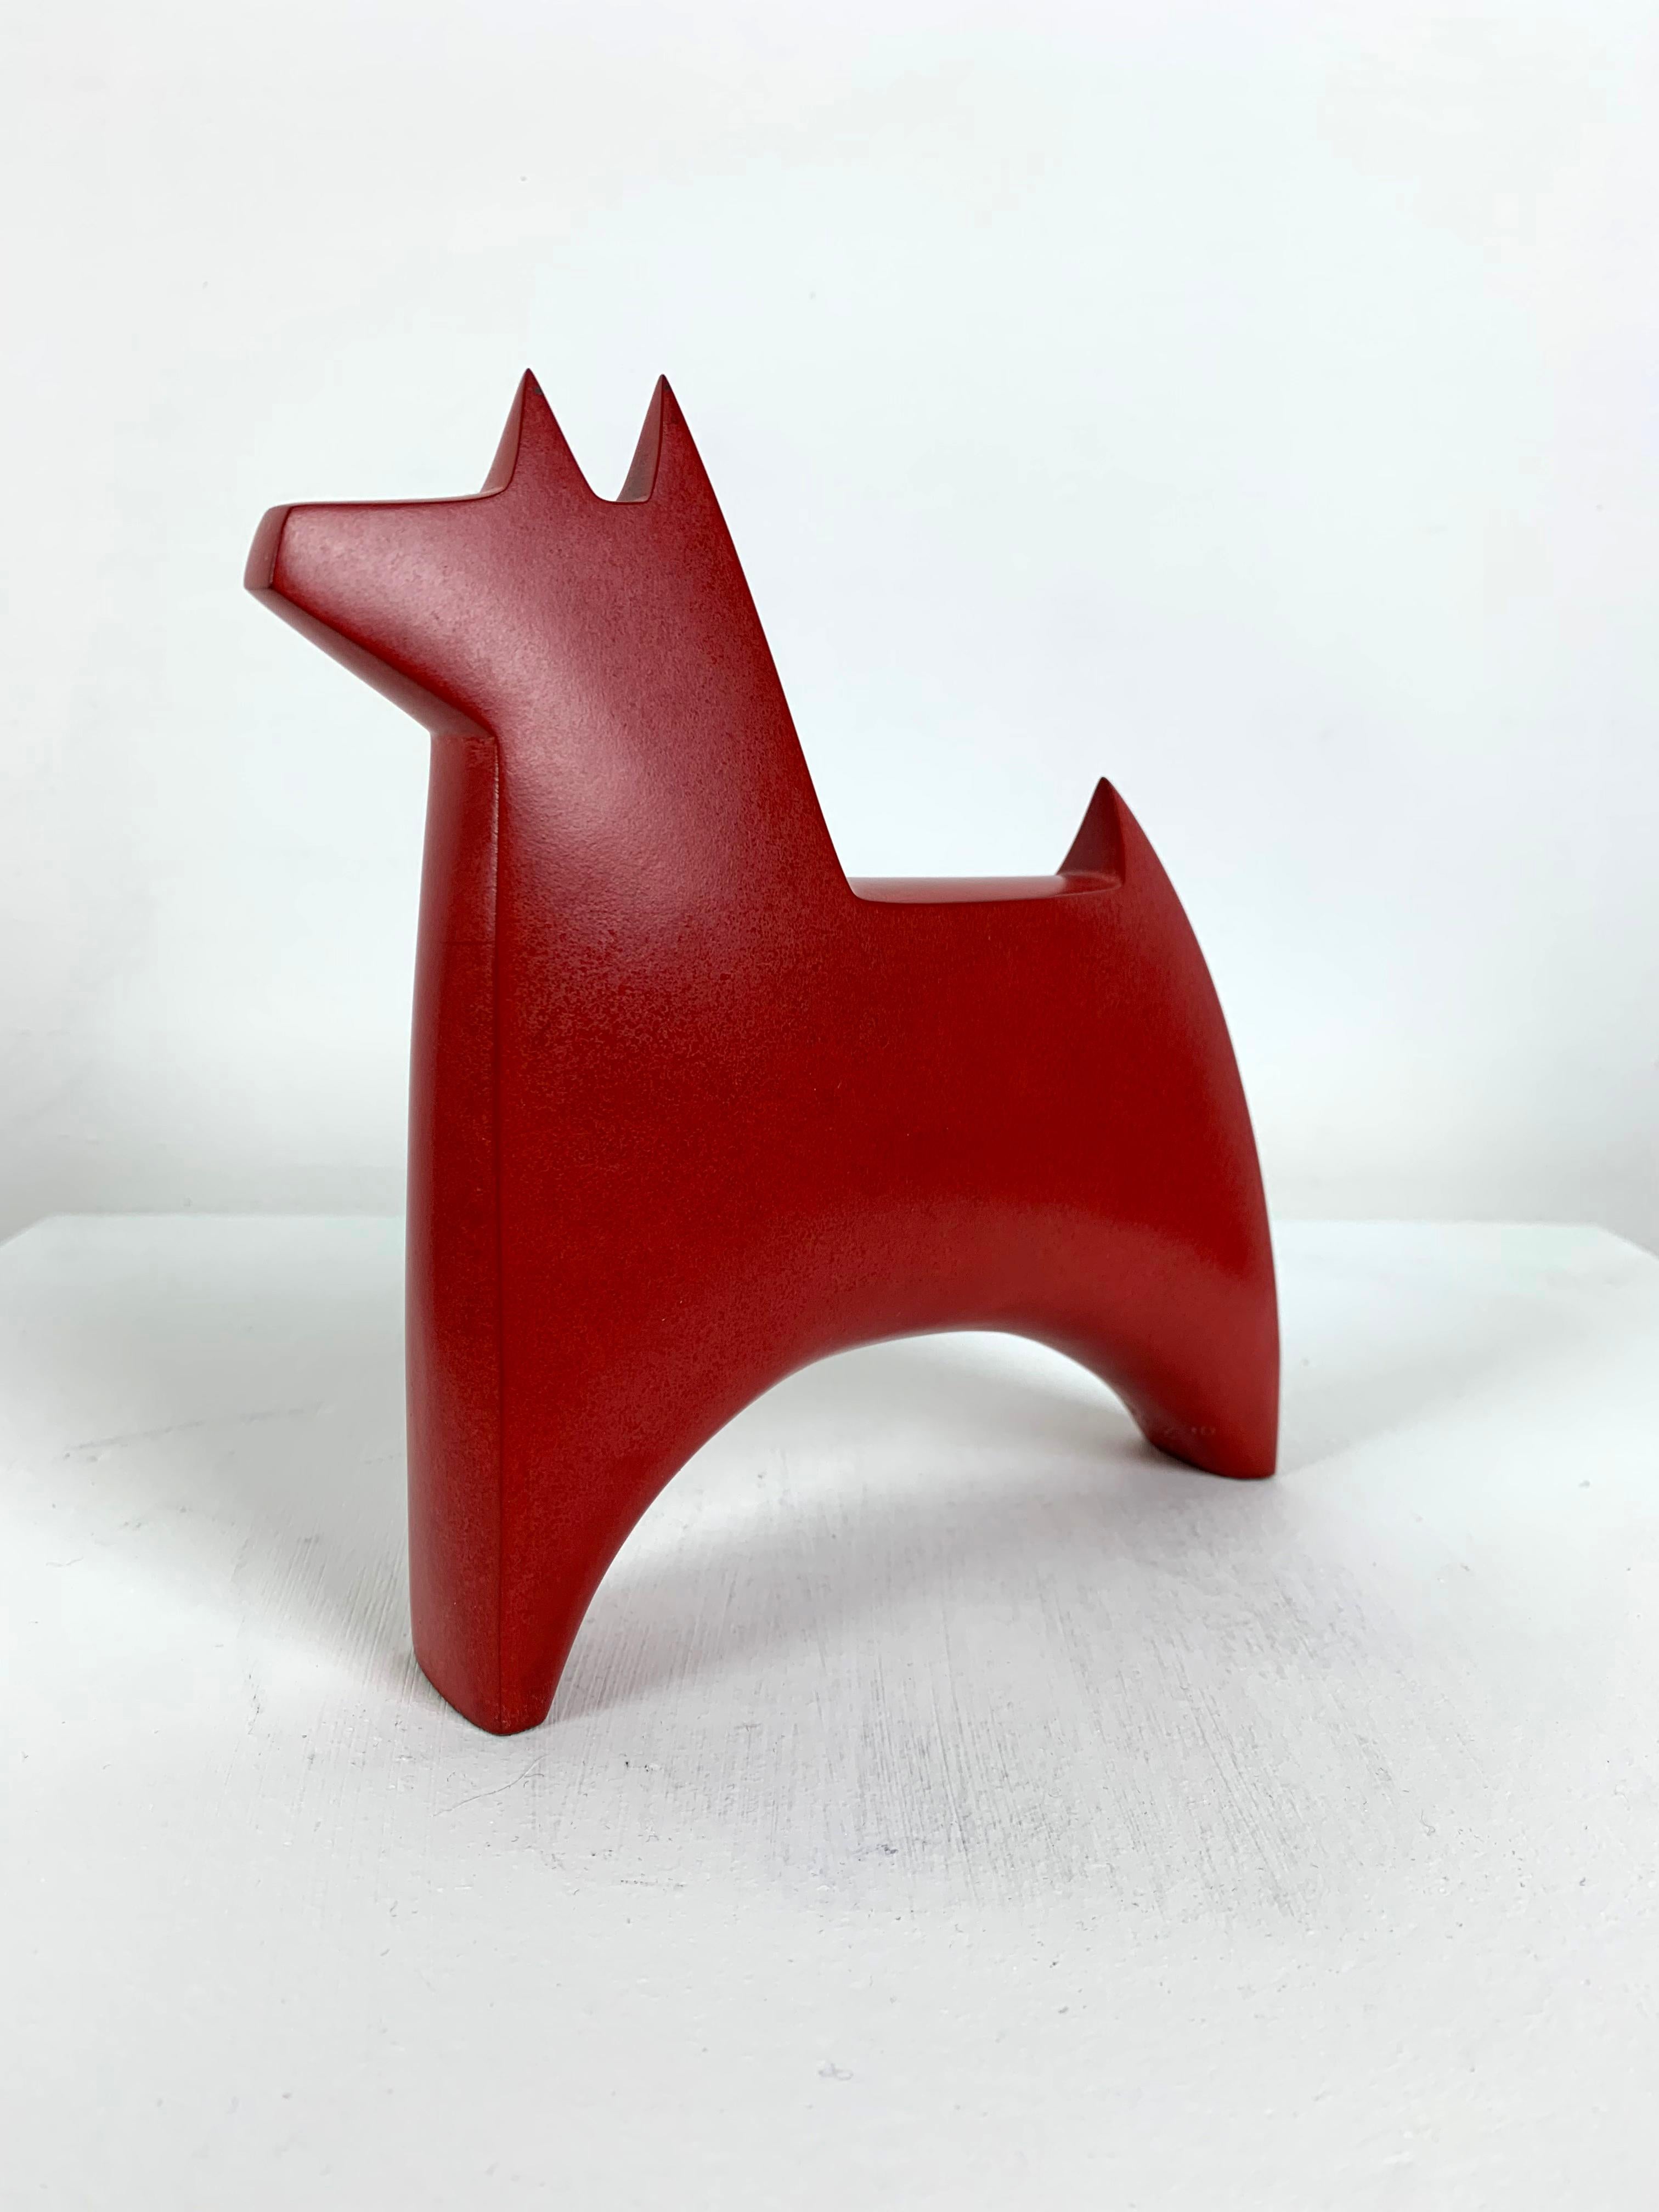 Dogstar - Sculpture by Stephen Page